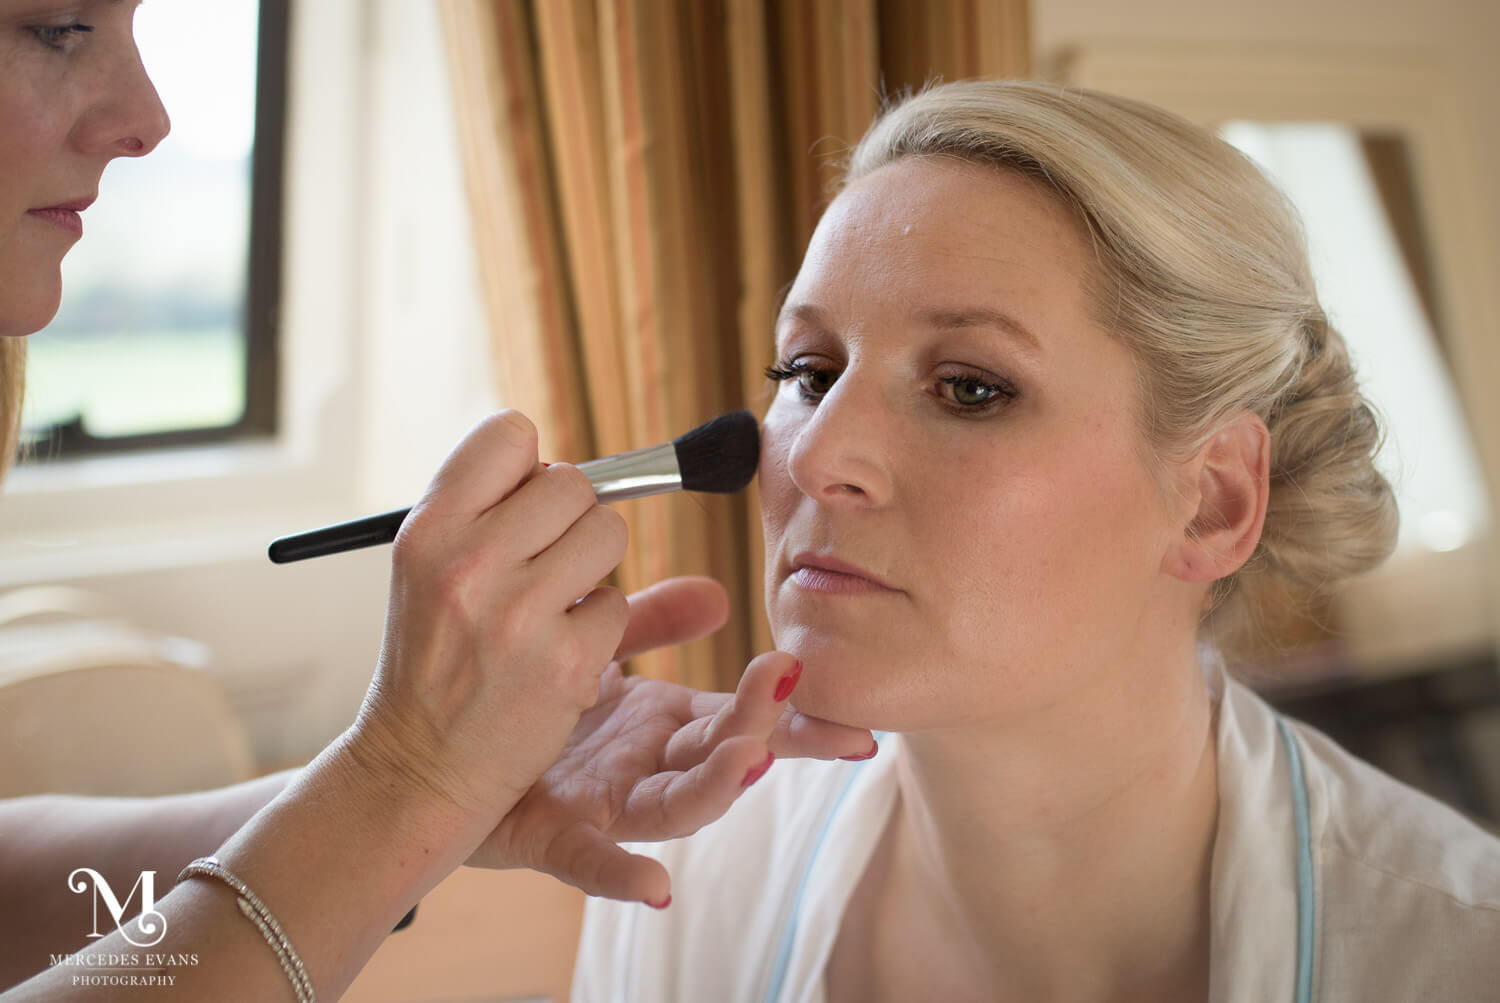 the make up artist applies the bride's blusher in the seymour room at the elvetham